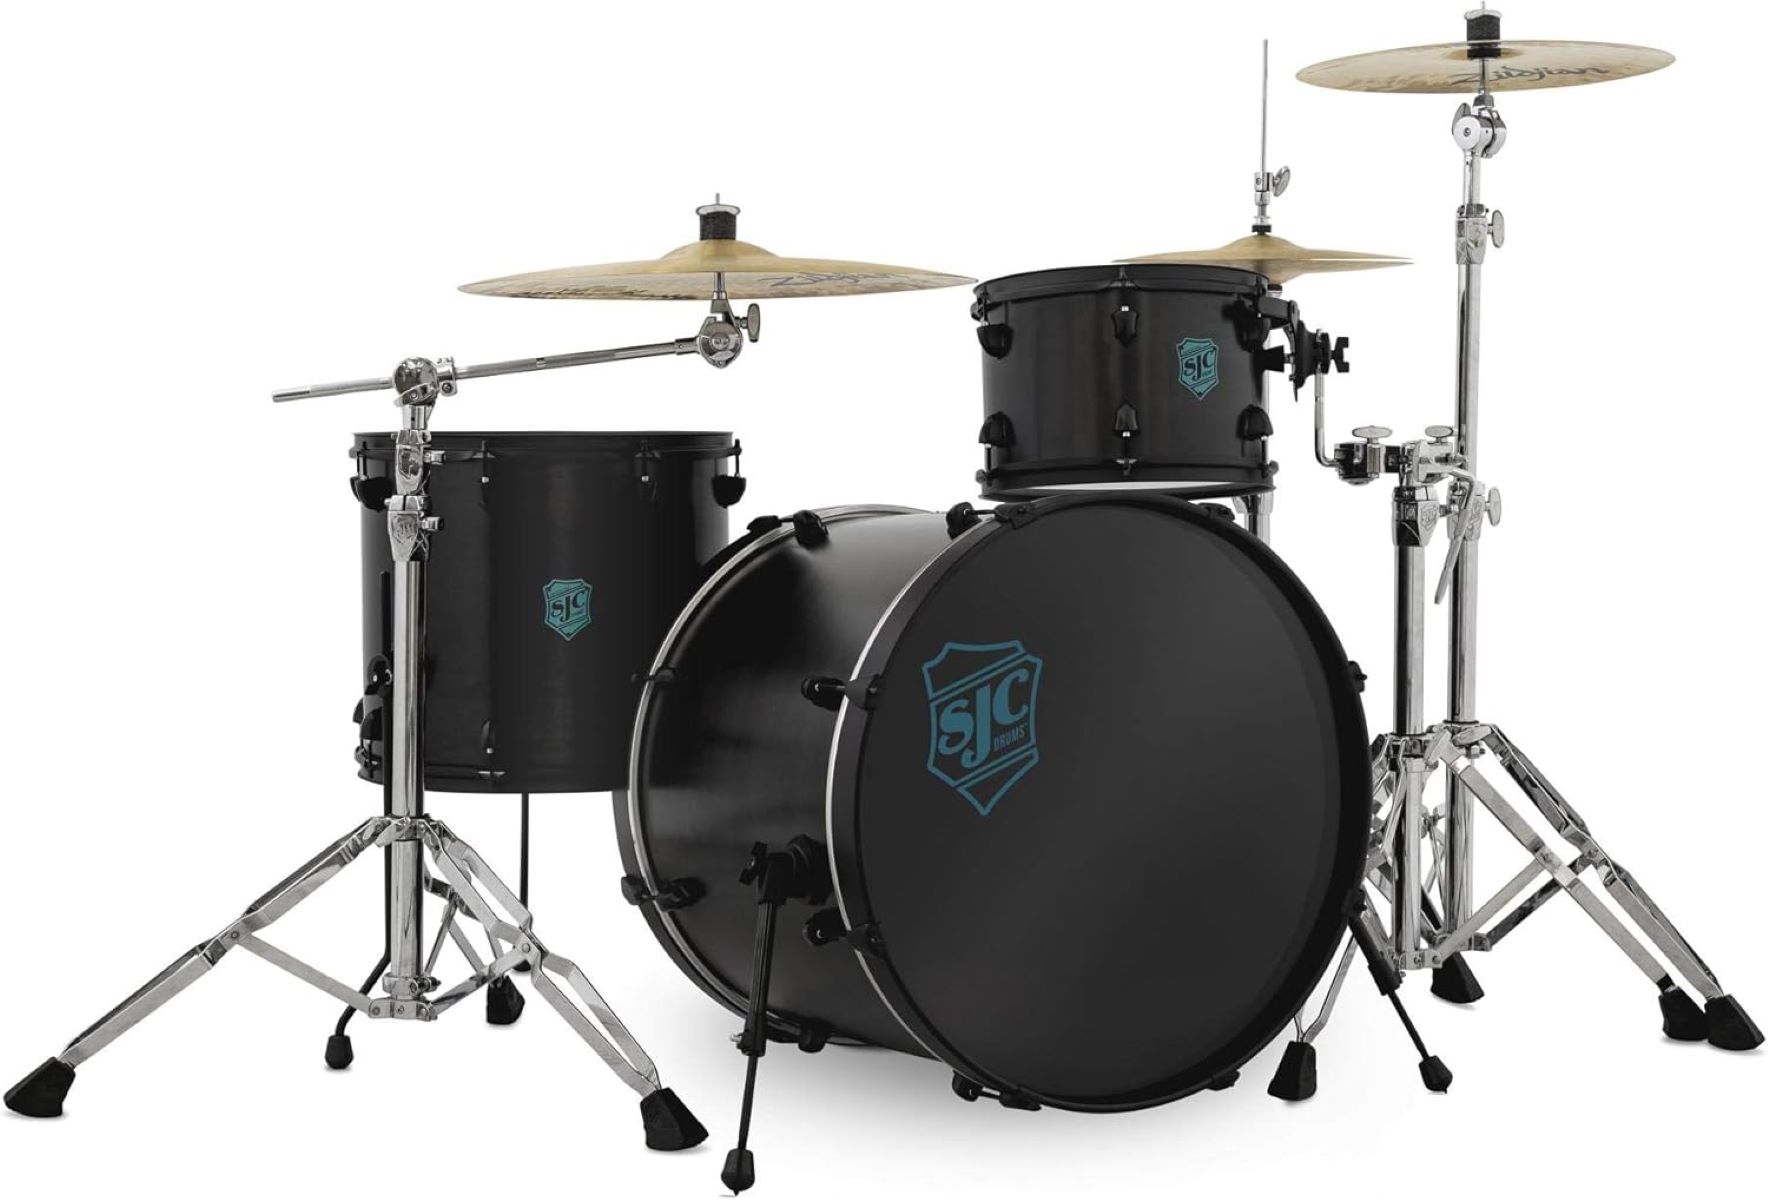 Why Do SJC Drums Cost So Much